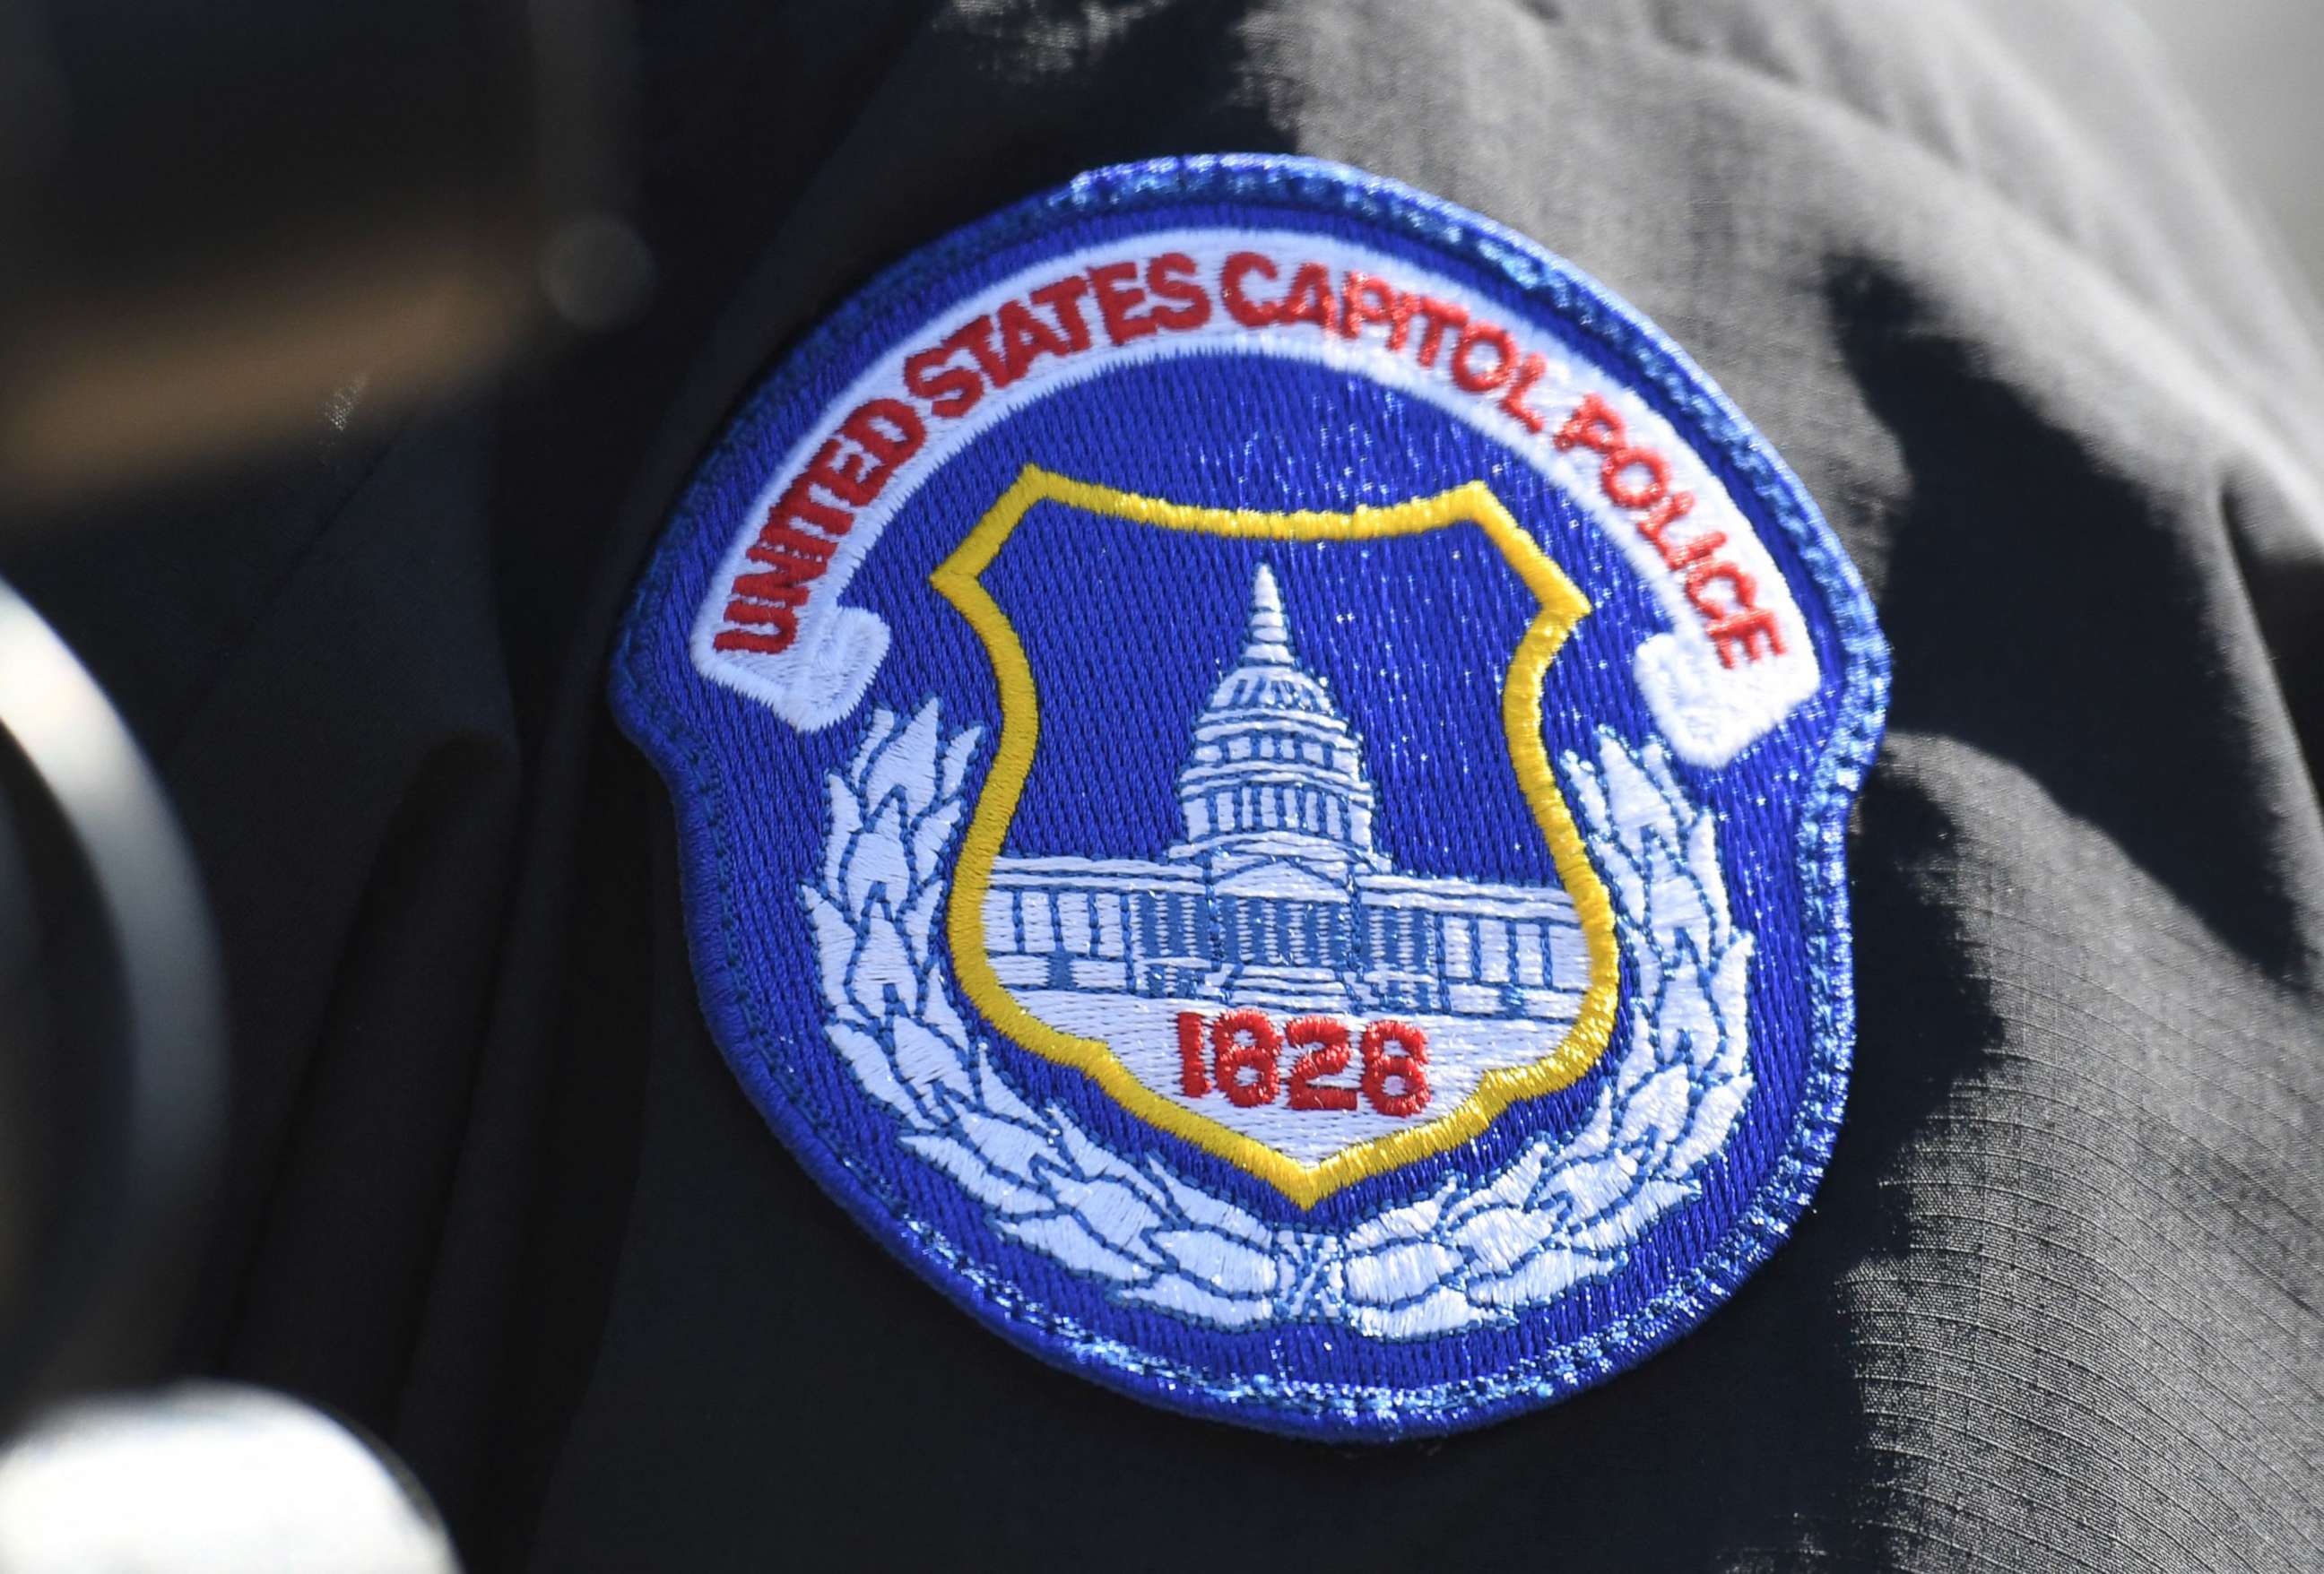 PHOTO: The badge of a Capitol Police Officer is seen during a press conference near the Capitol, April 2, 2021.